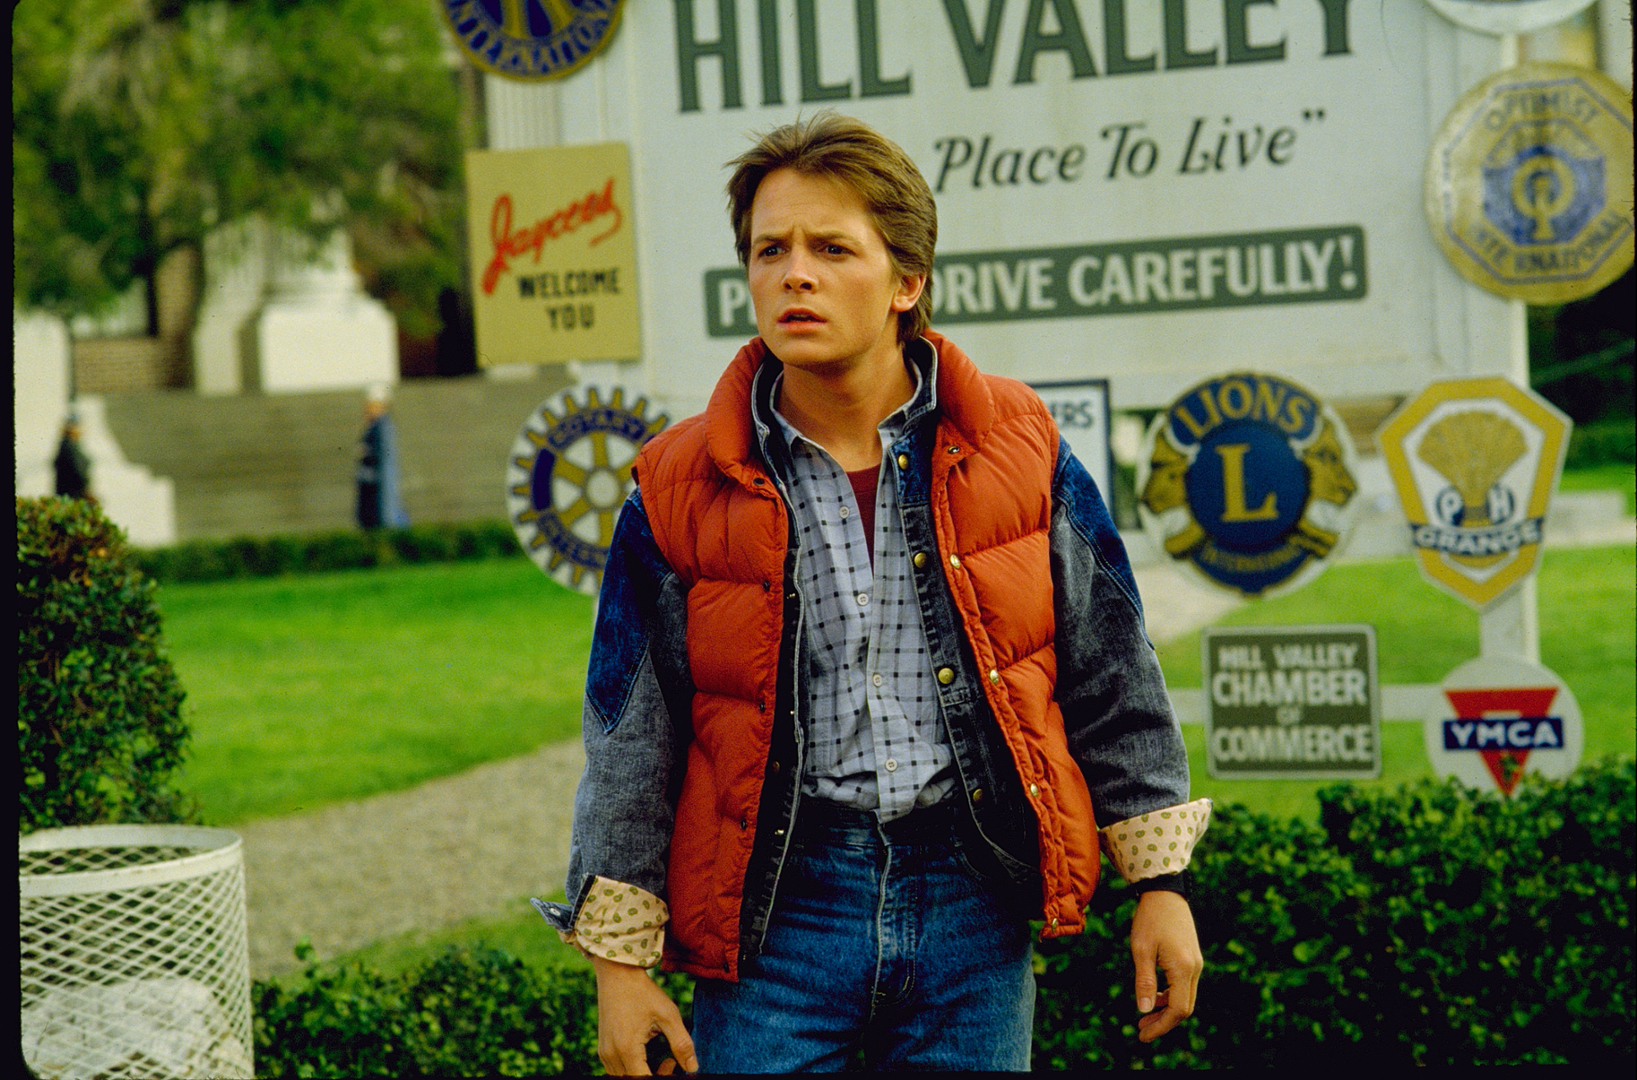 Still from Back to the Future of the Welcome to Hill Valley sign.